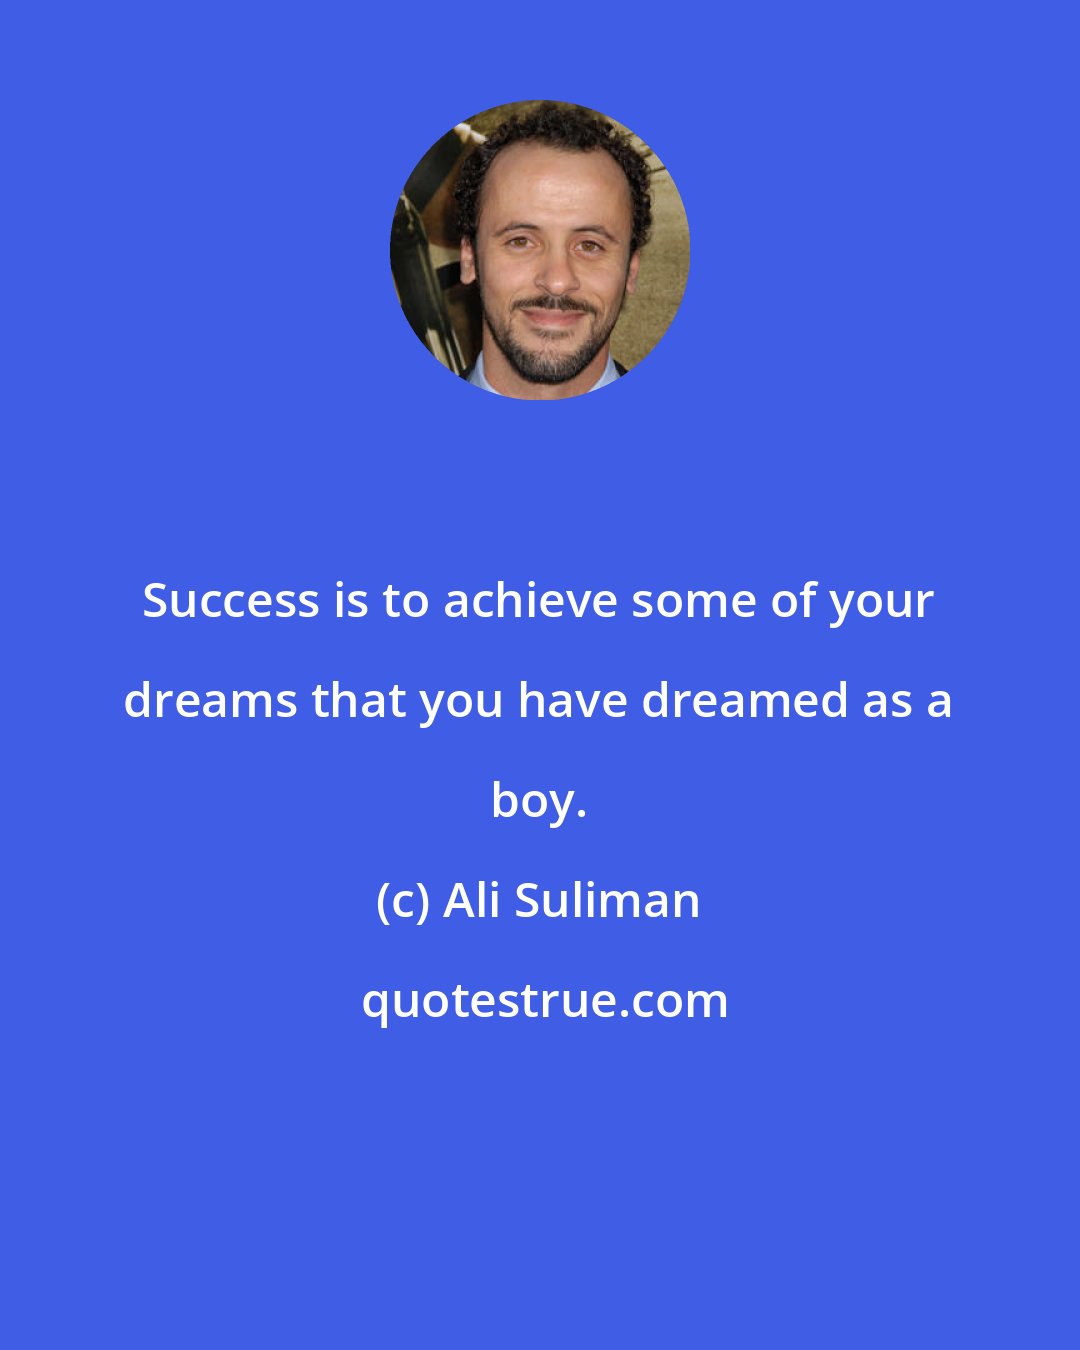 Ali Suliman: Success is to achieve some of your dreams that you have dreamed as a boy.